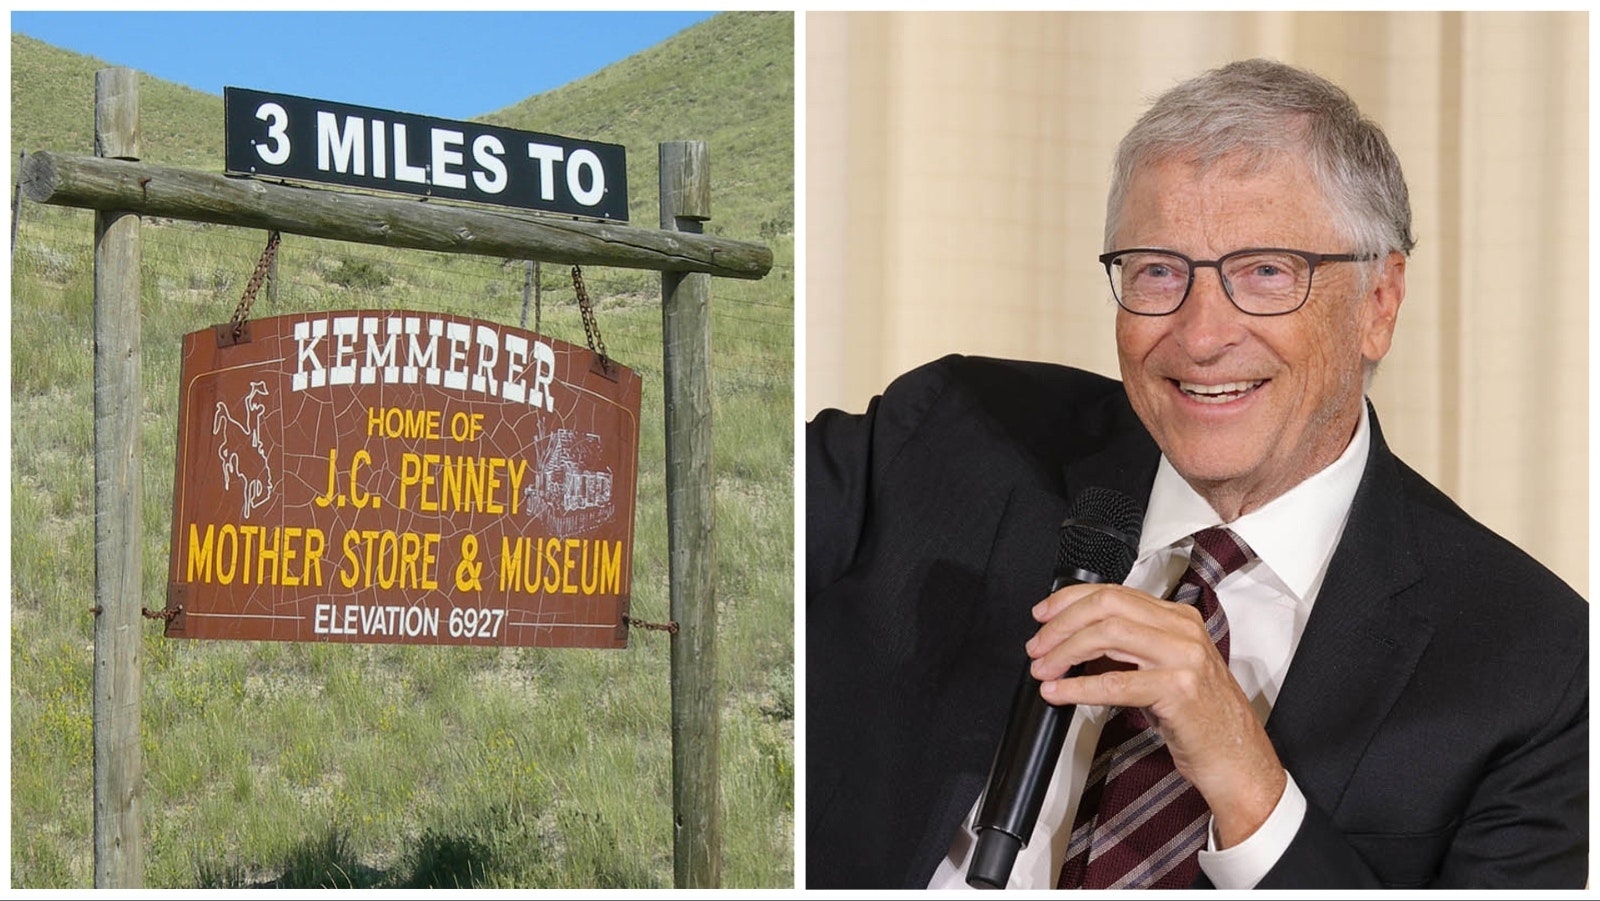 Billionaire Bill Gates will be in Kemmerer next month for the groundbreaking of construction on TerraPower's nuclear plant.